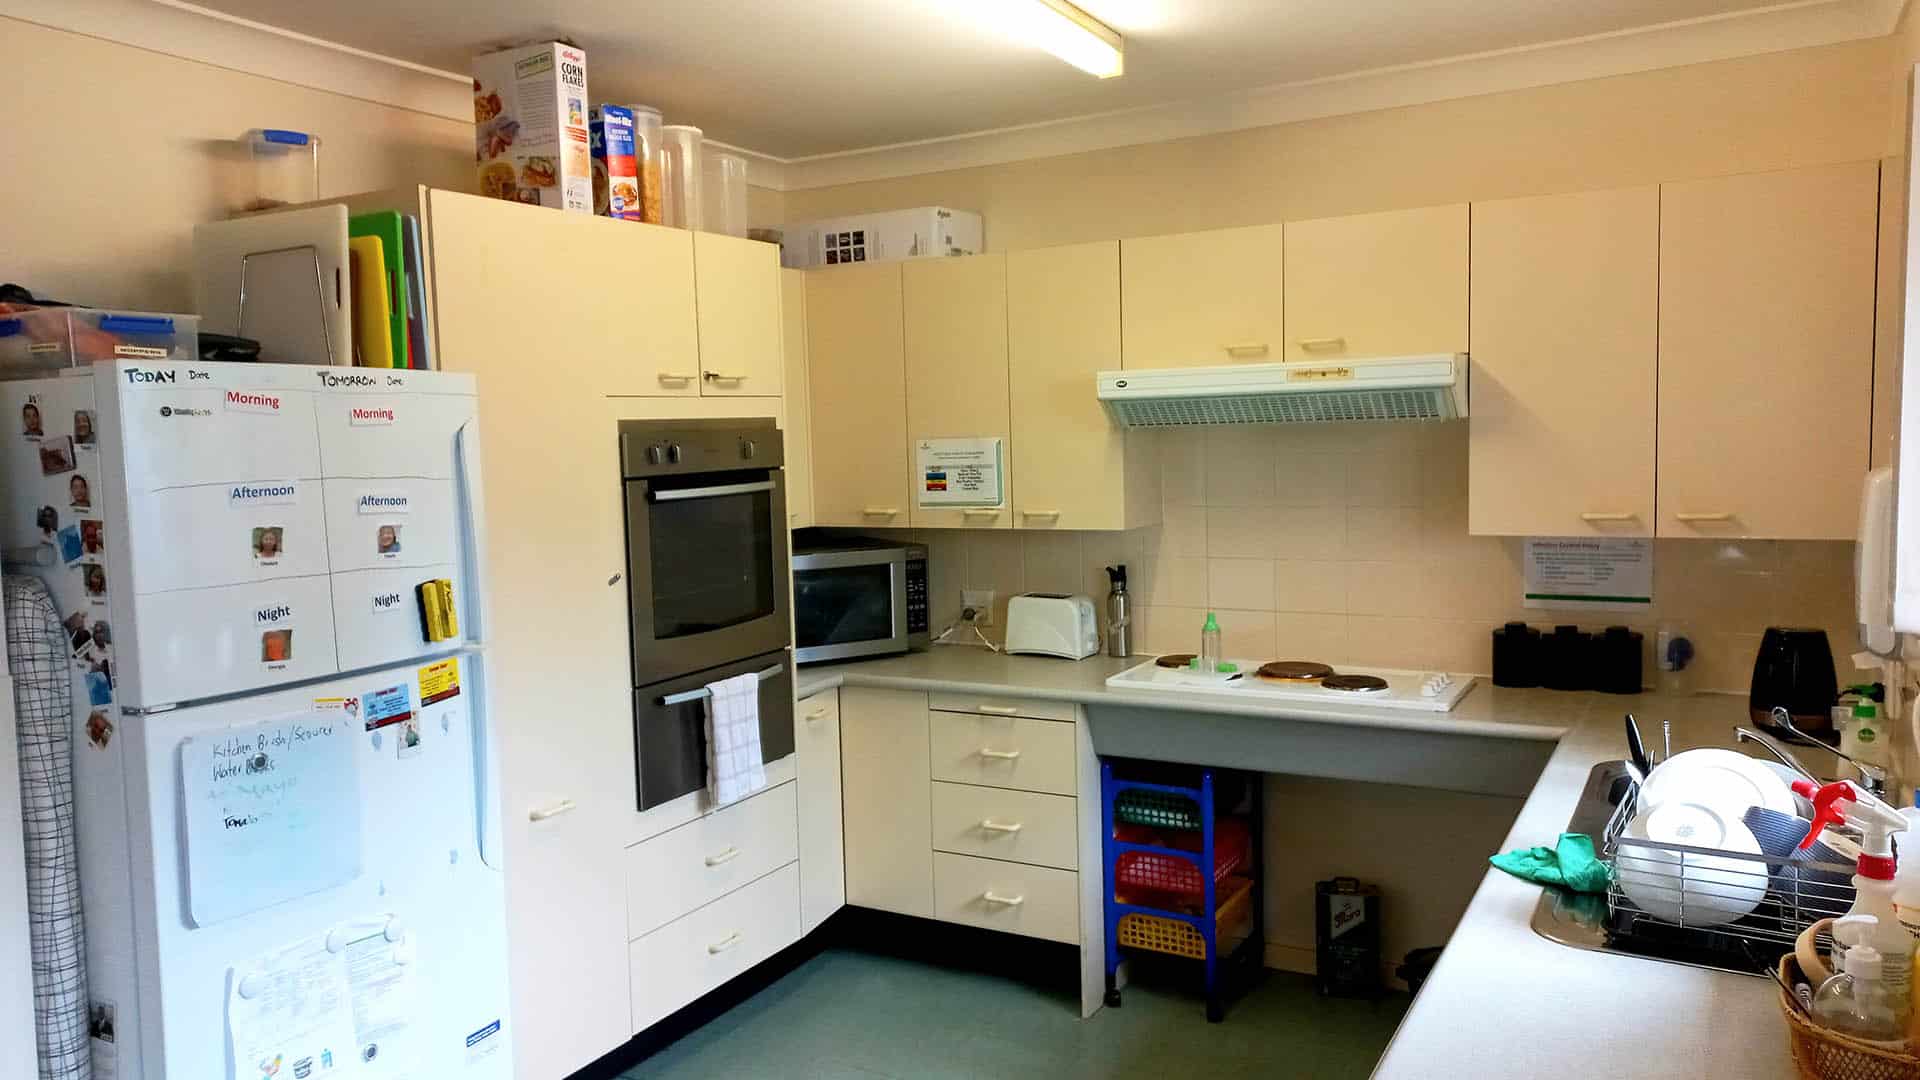 The light coloured kitchen with cupboards and cooking facilities.